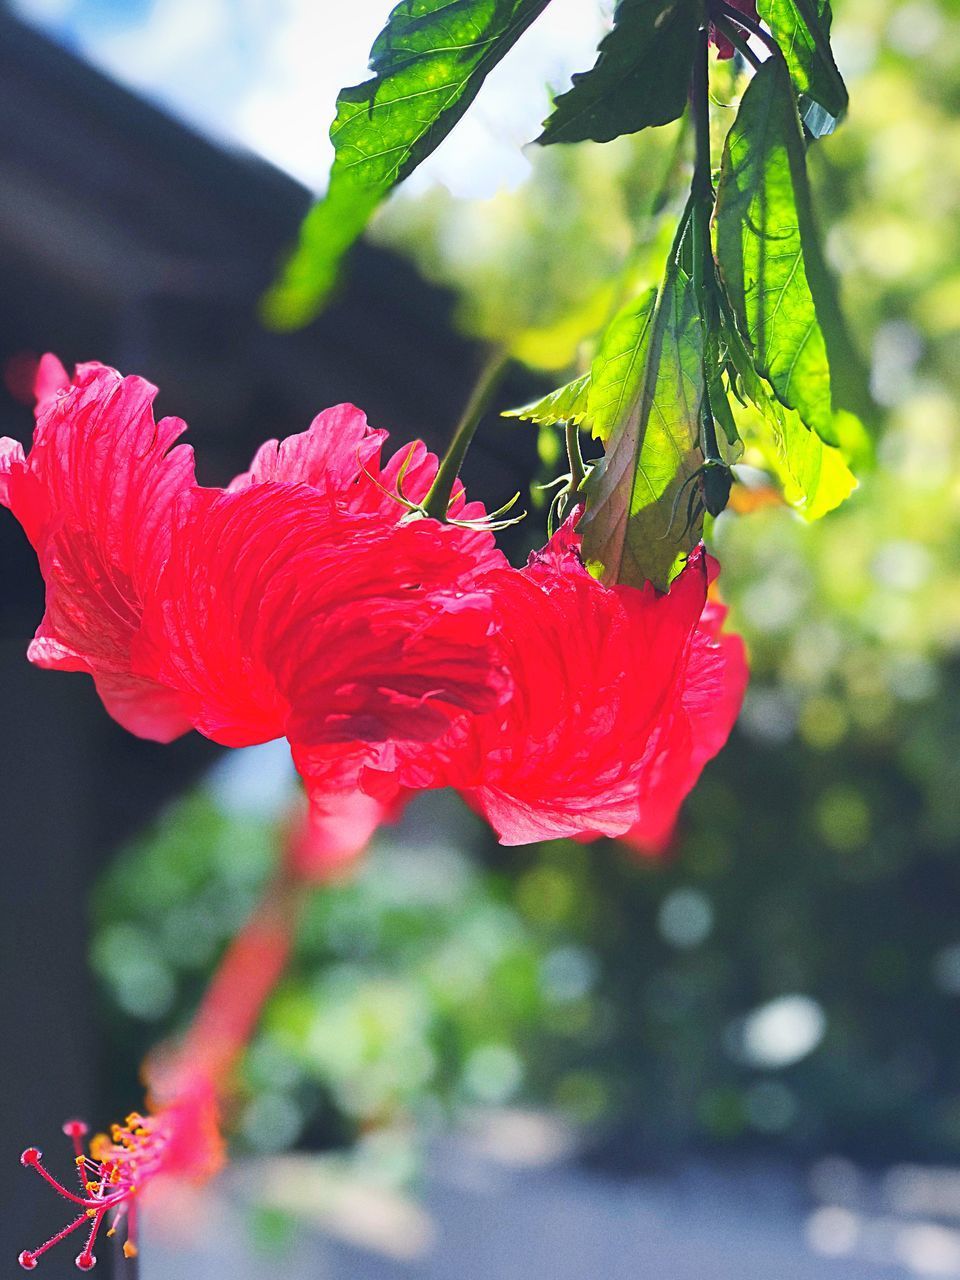 CLOSE-UP OF RED HIBISCUS PLANT